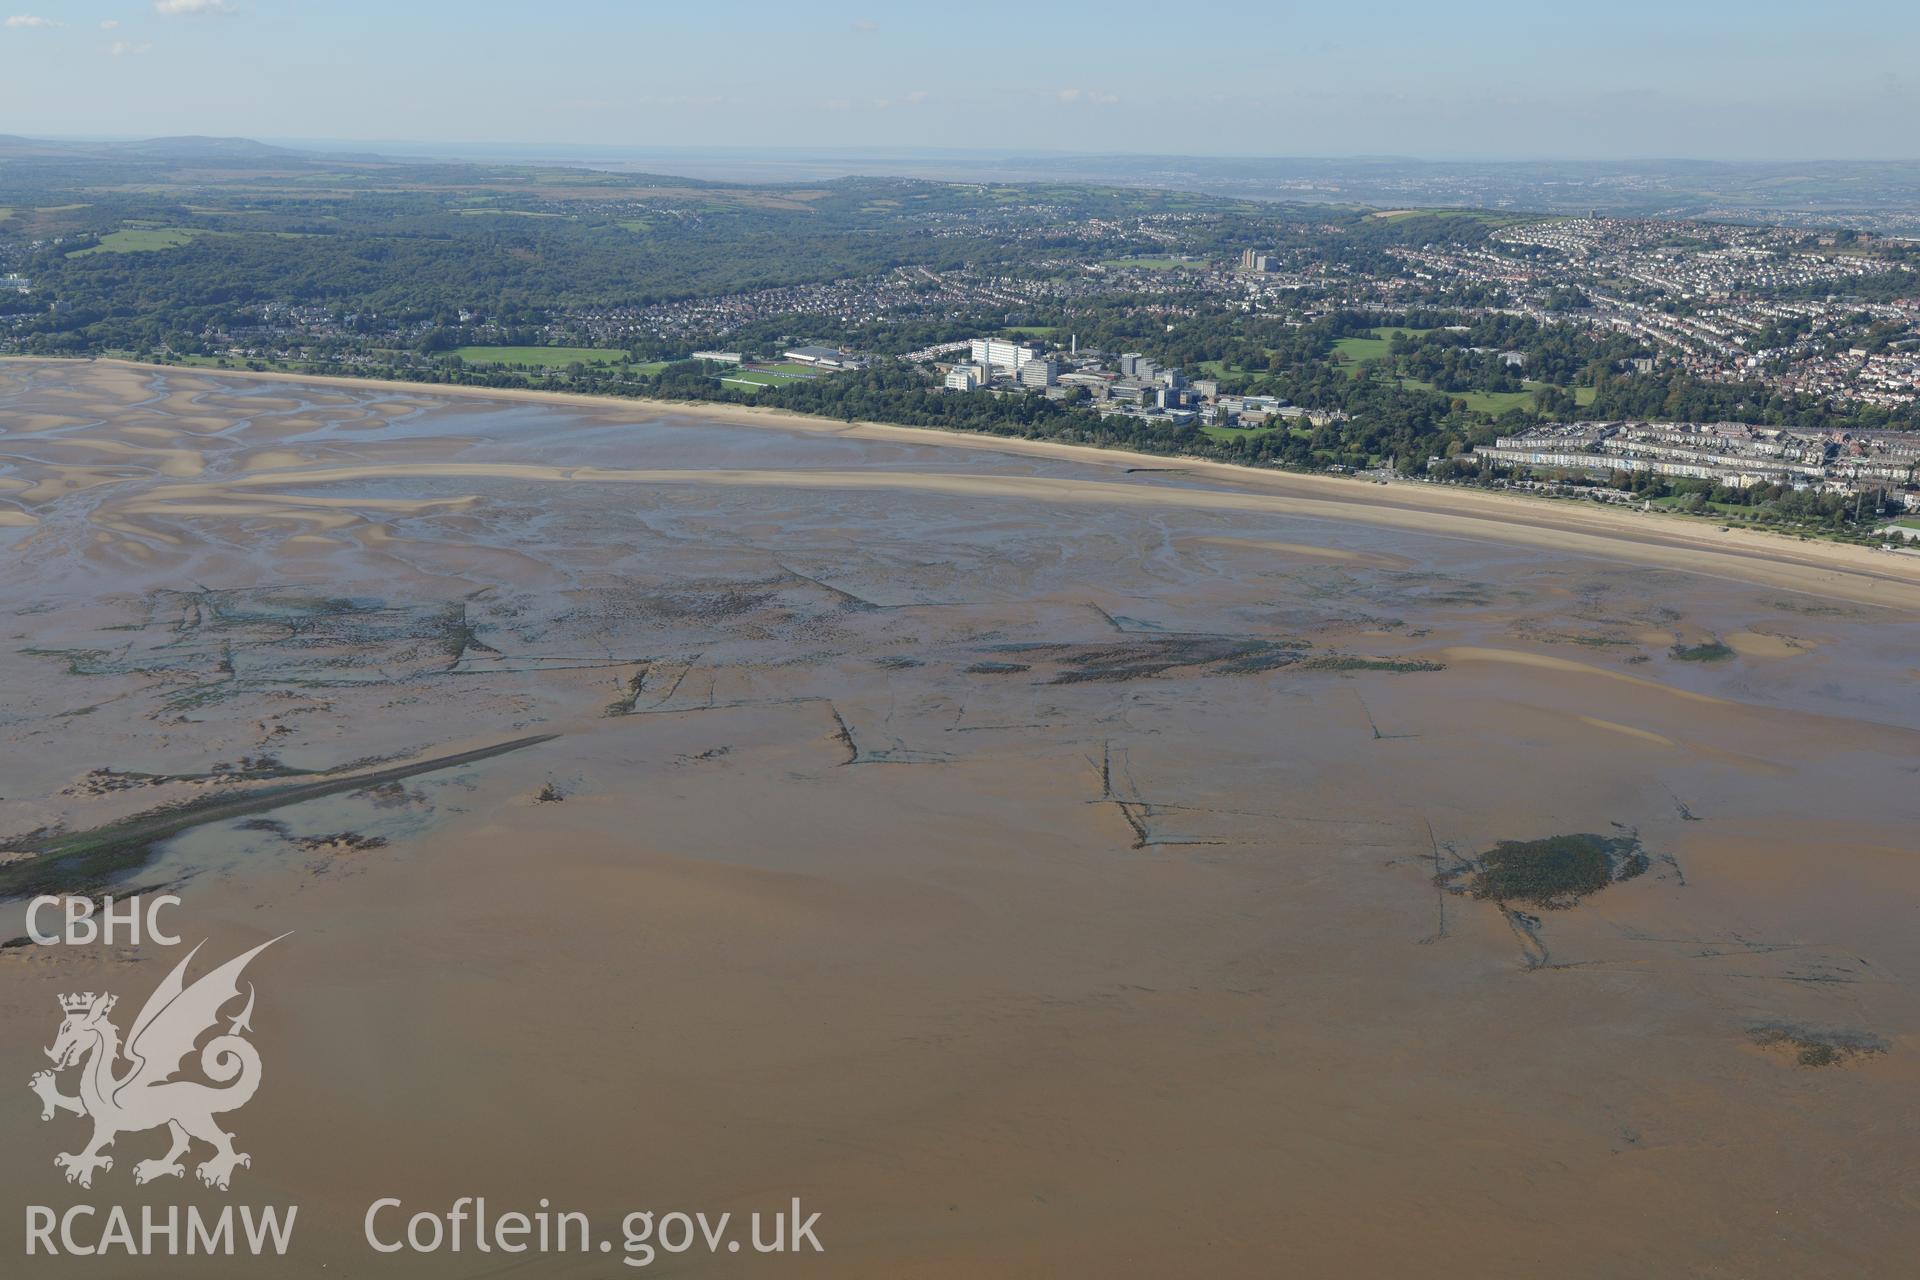 Fishtraps off the coast of Swansea Bay, with Swansea University and Swansea city beyond. Oblique aerial photograph taken during the Royal Commission's programme of archaeological aerial reconnaissance by Toby Driver on 30th September 2015.